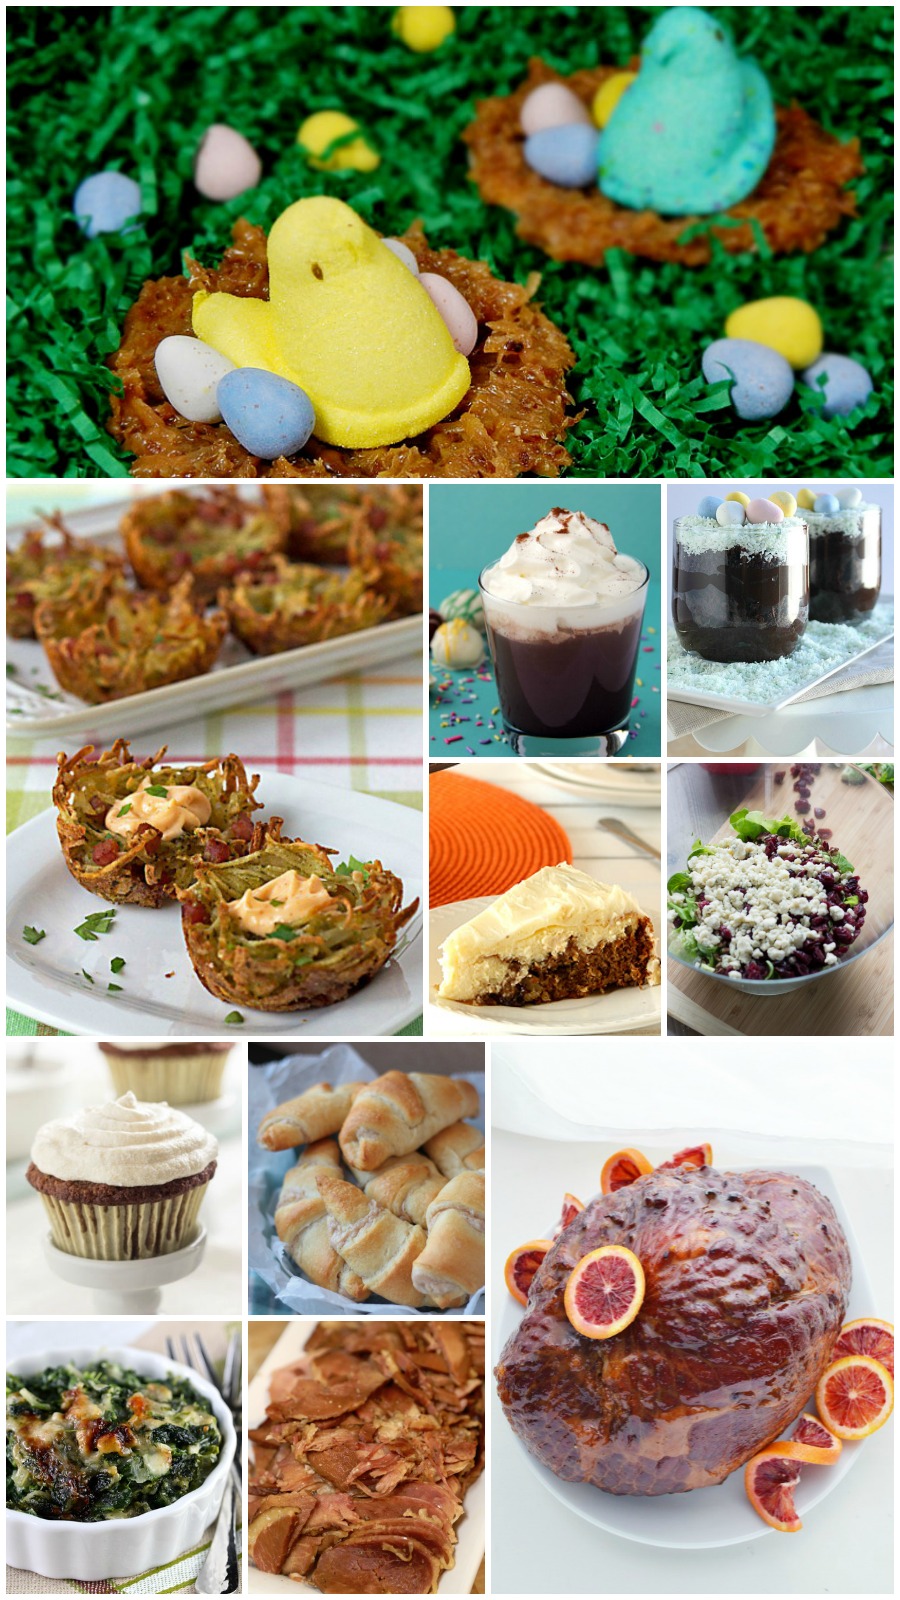 35+ Easter Dinner Recipes- A great collection full of dinner ideas from appetizers to desserts! 